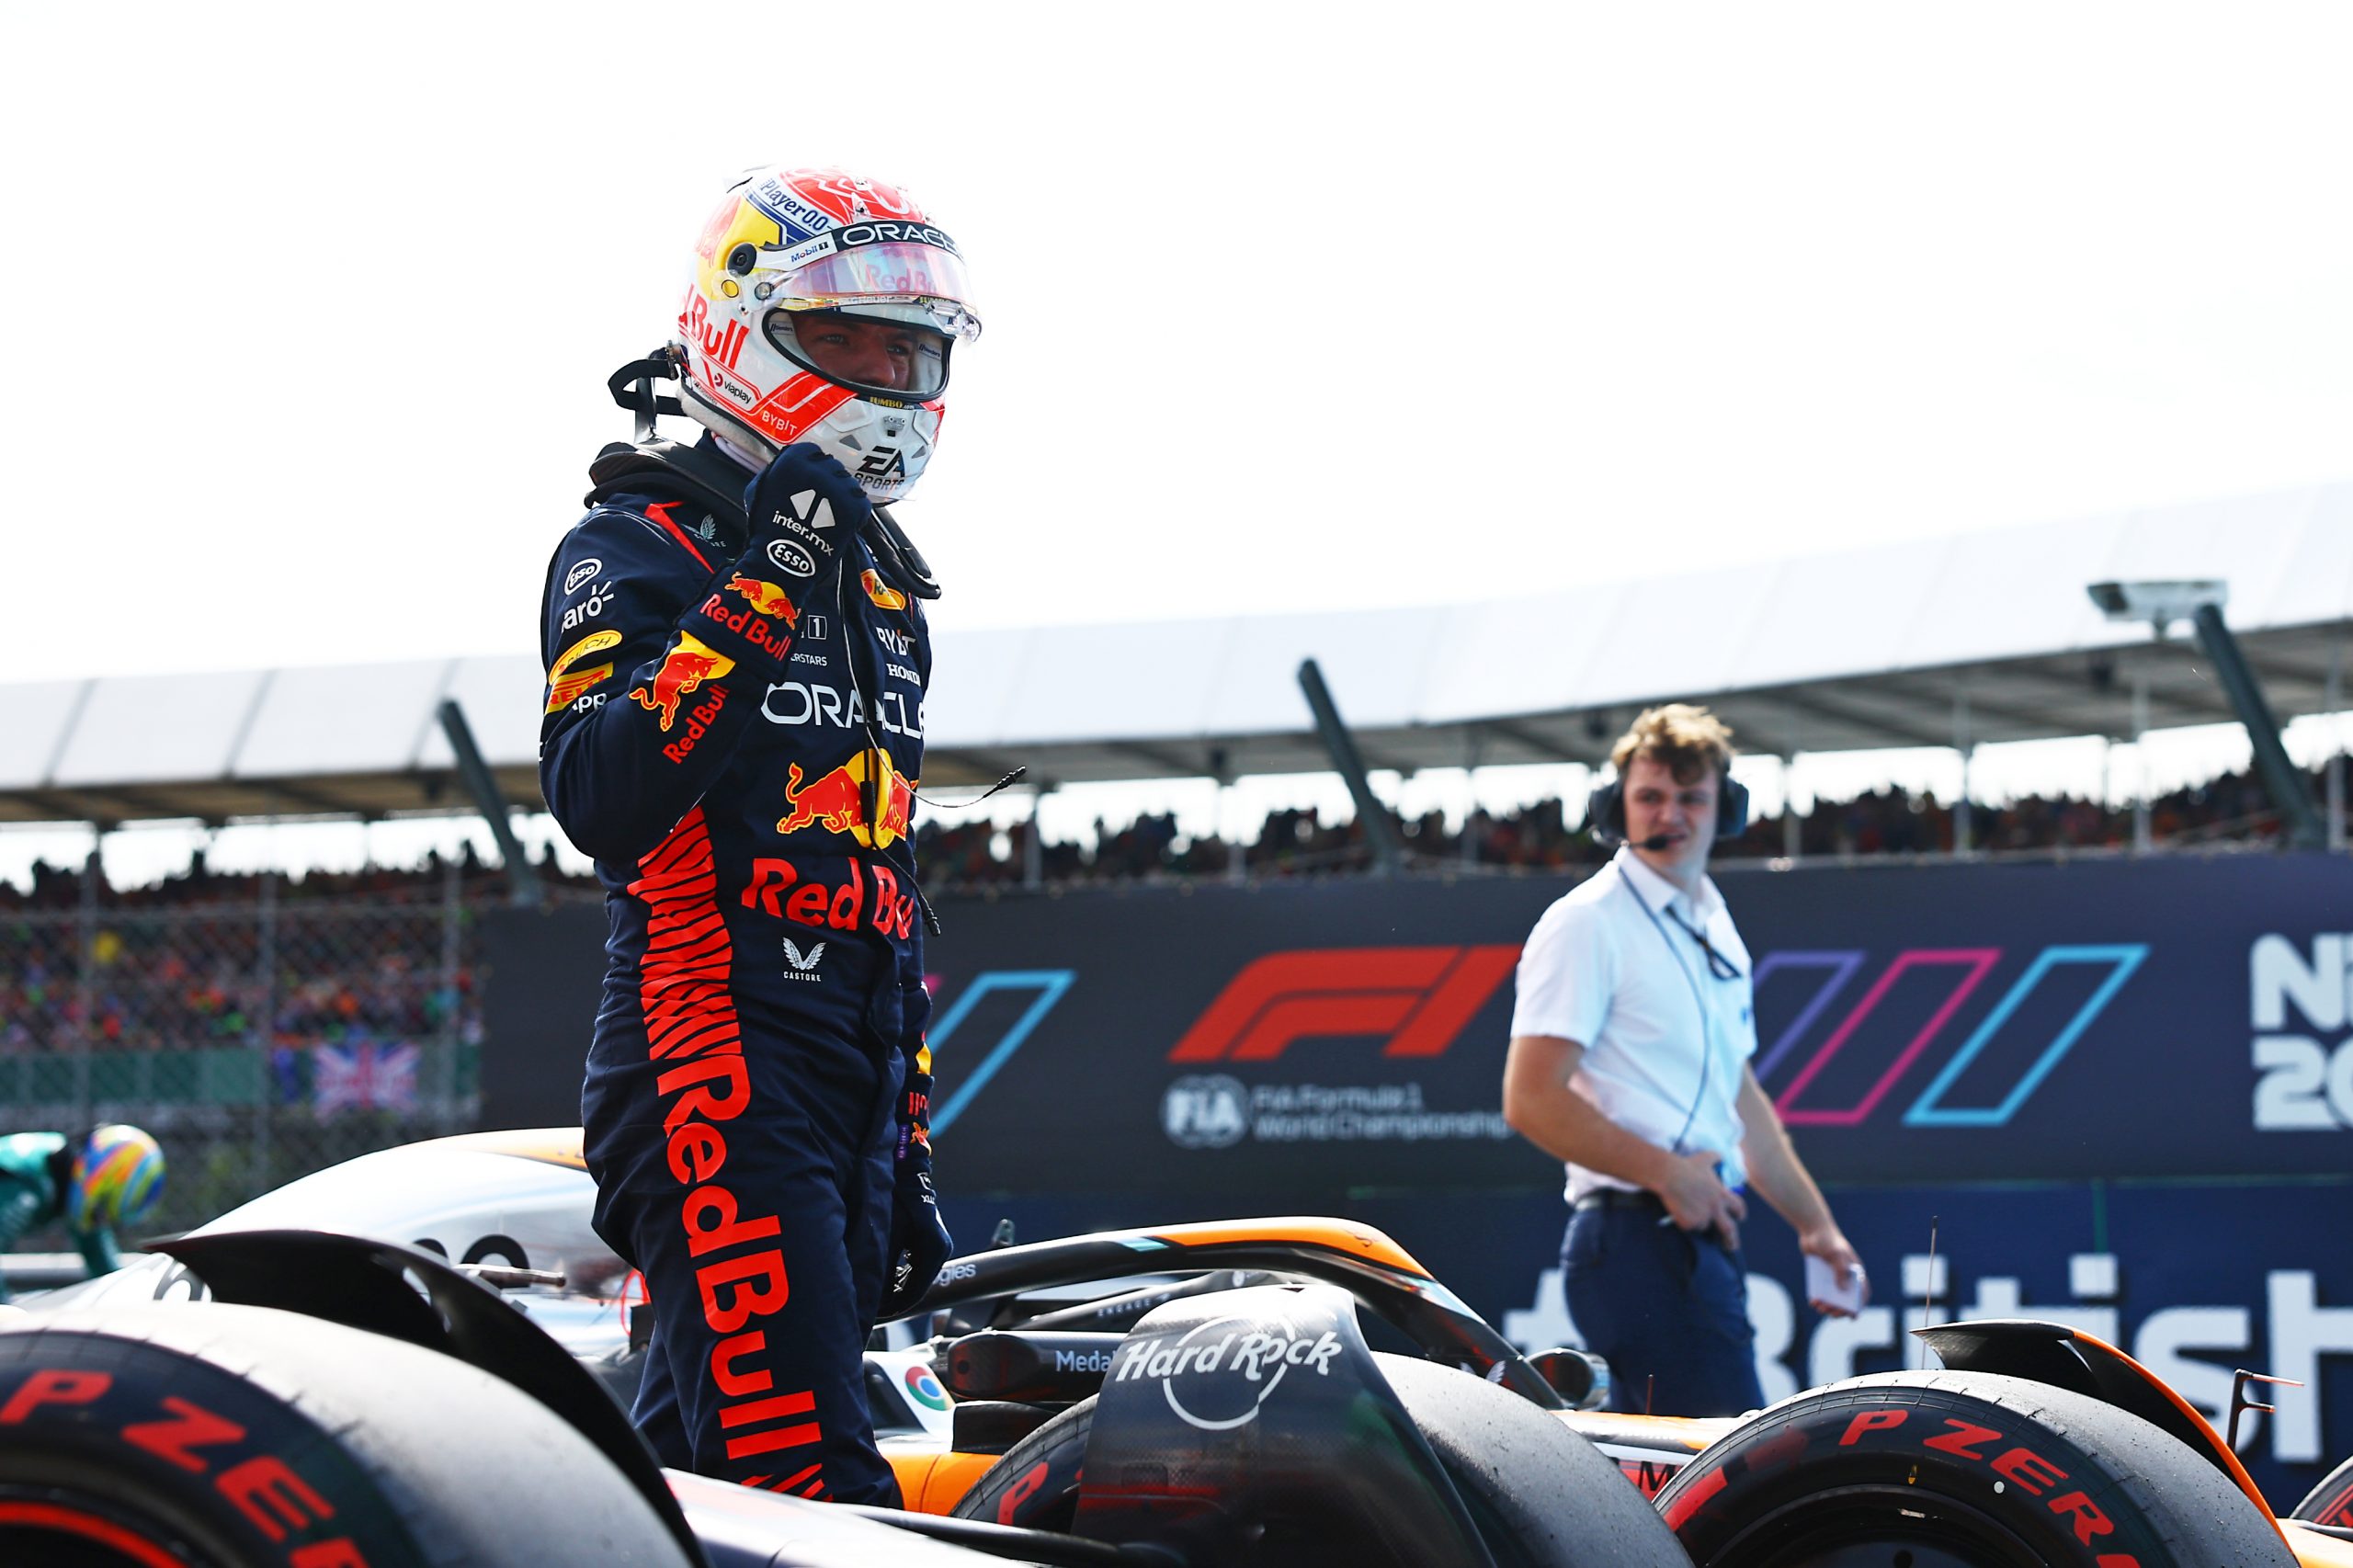 Max Verstappen (1) exits his Red Bull after taking the pole for the British Grand Prix ahead of Lando Norris (4) and Oscar Piastri (81)